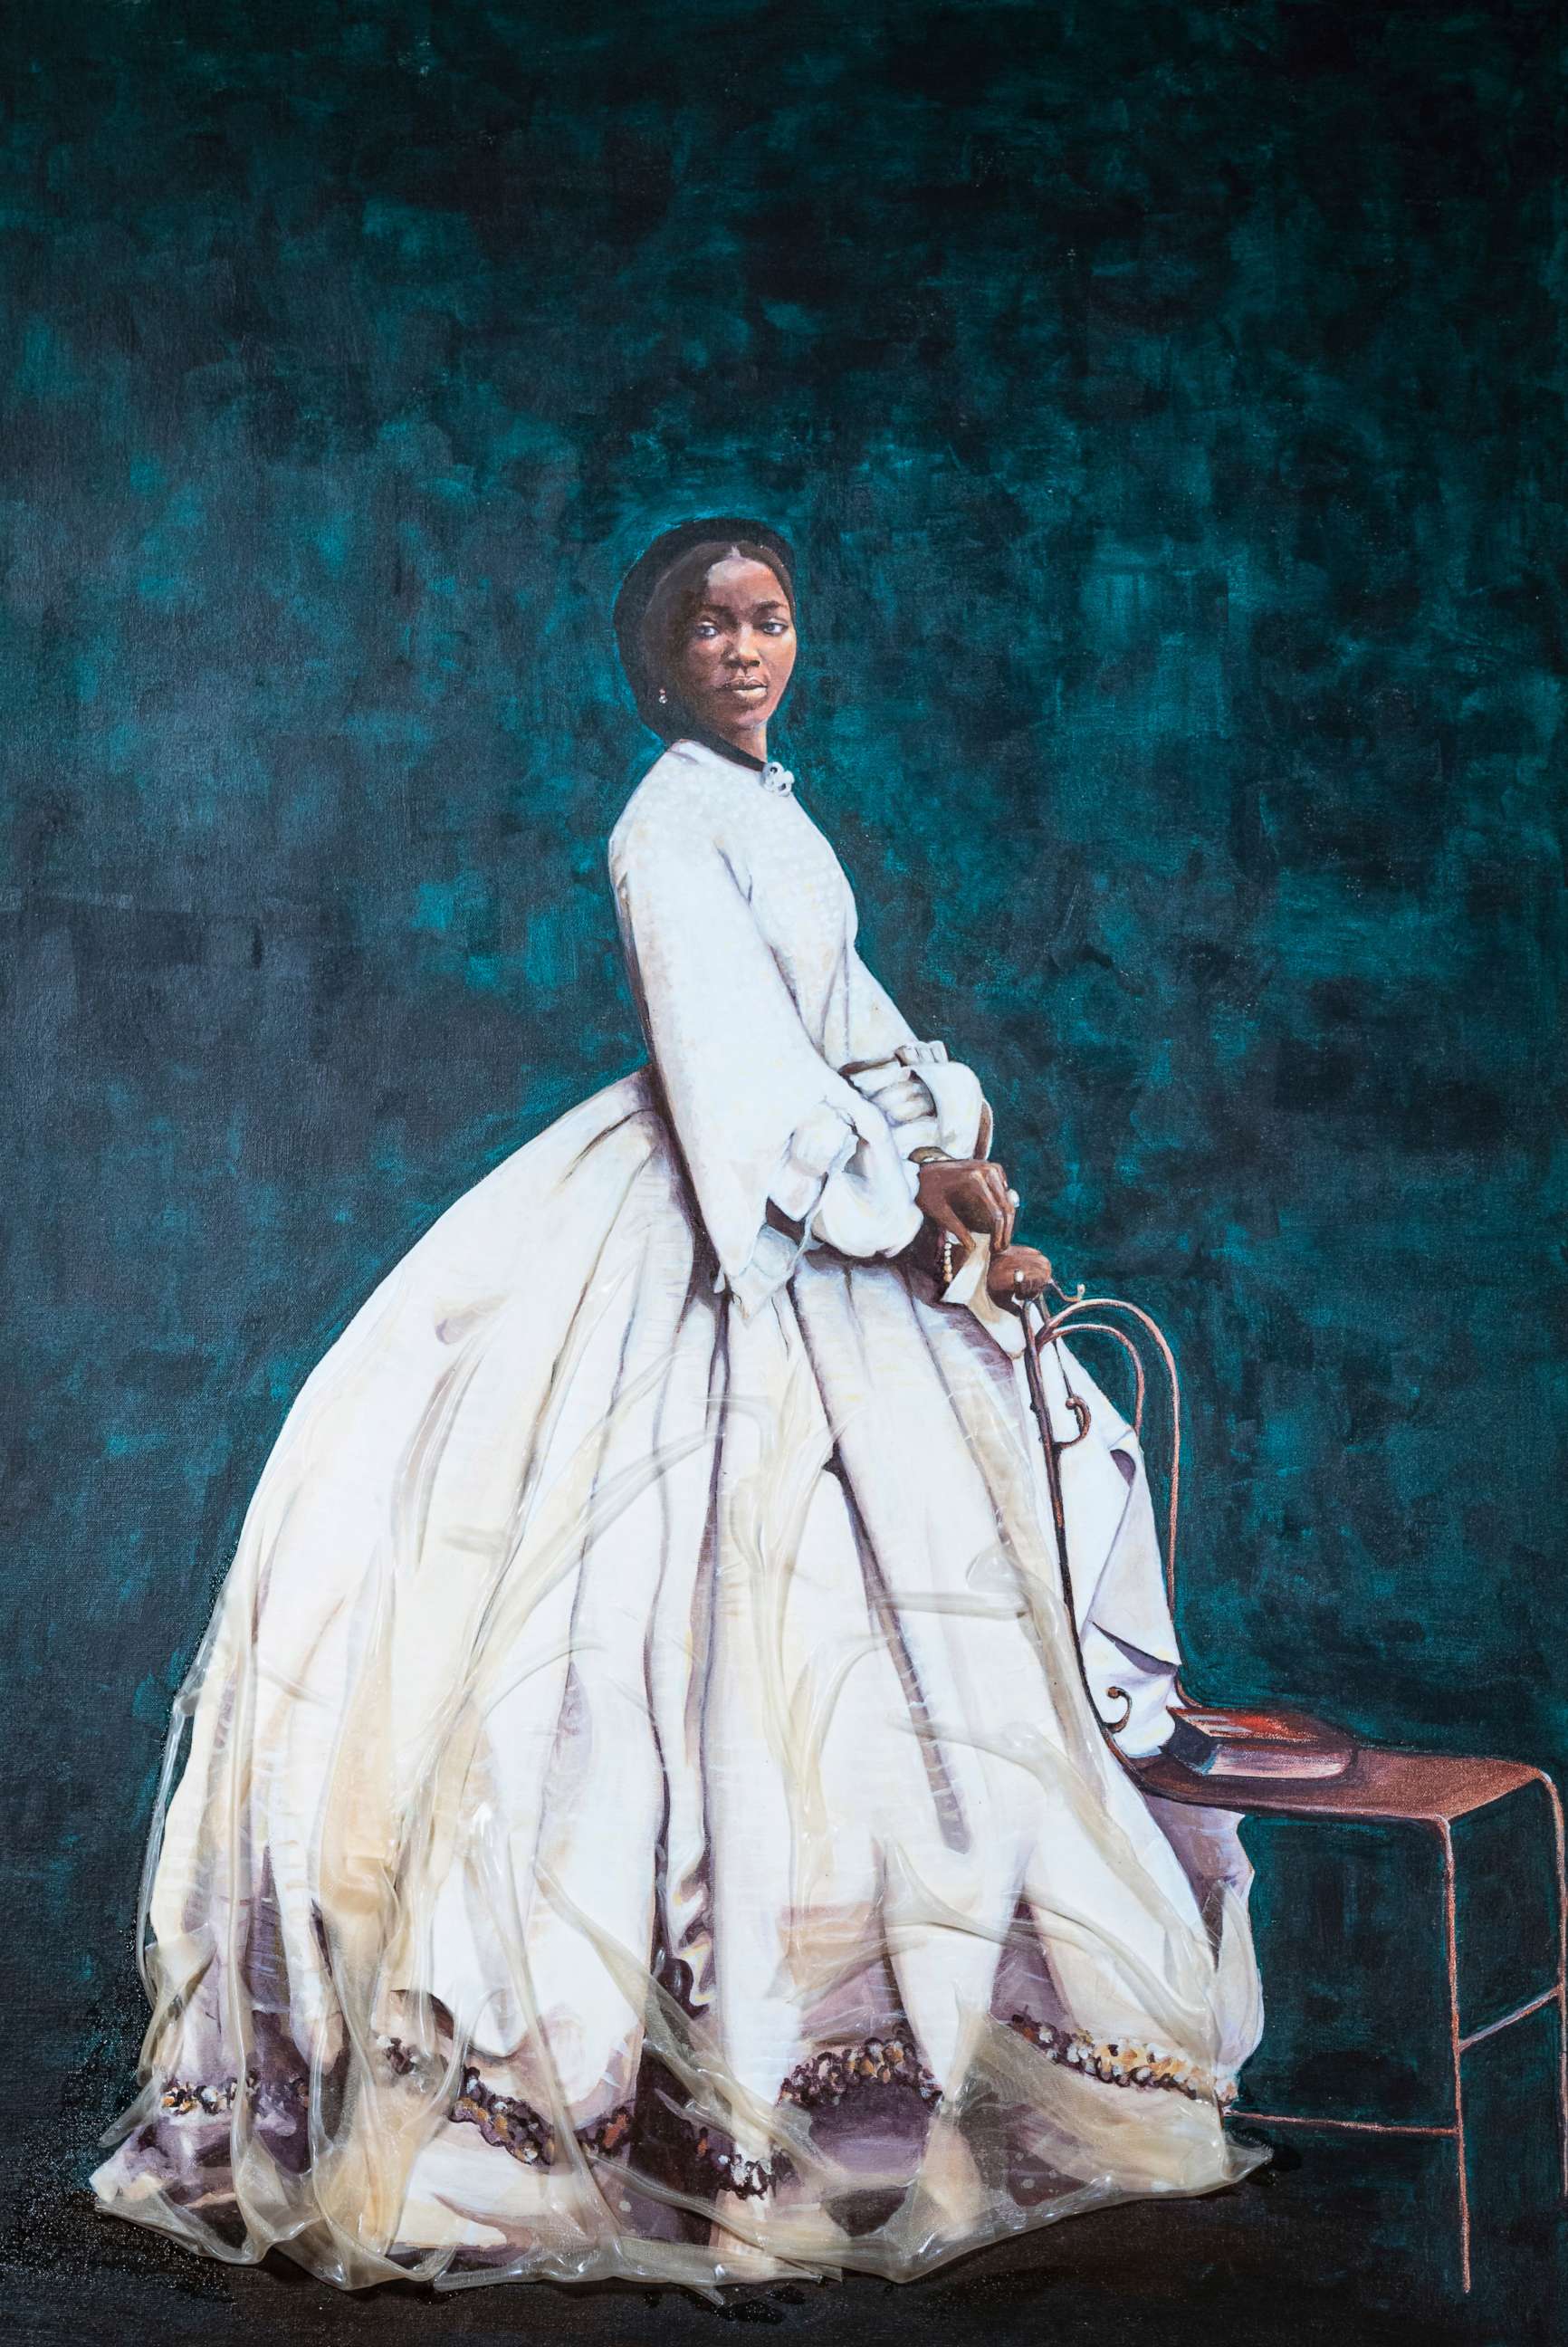 PHOTO:English Heritage has today unveiled a new portrait of Sarah Forbes Bonetta, Queen Victoria's African goddaughter, at Osborne, the nineteenth century monarch's seaside home on the Isle of Wight.